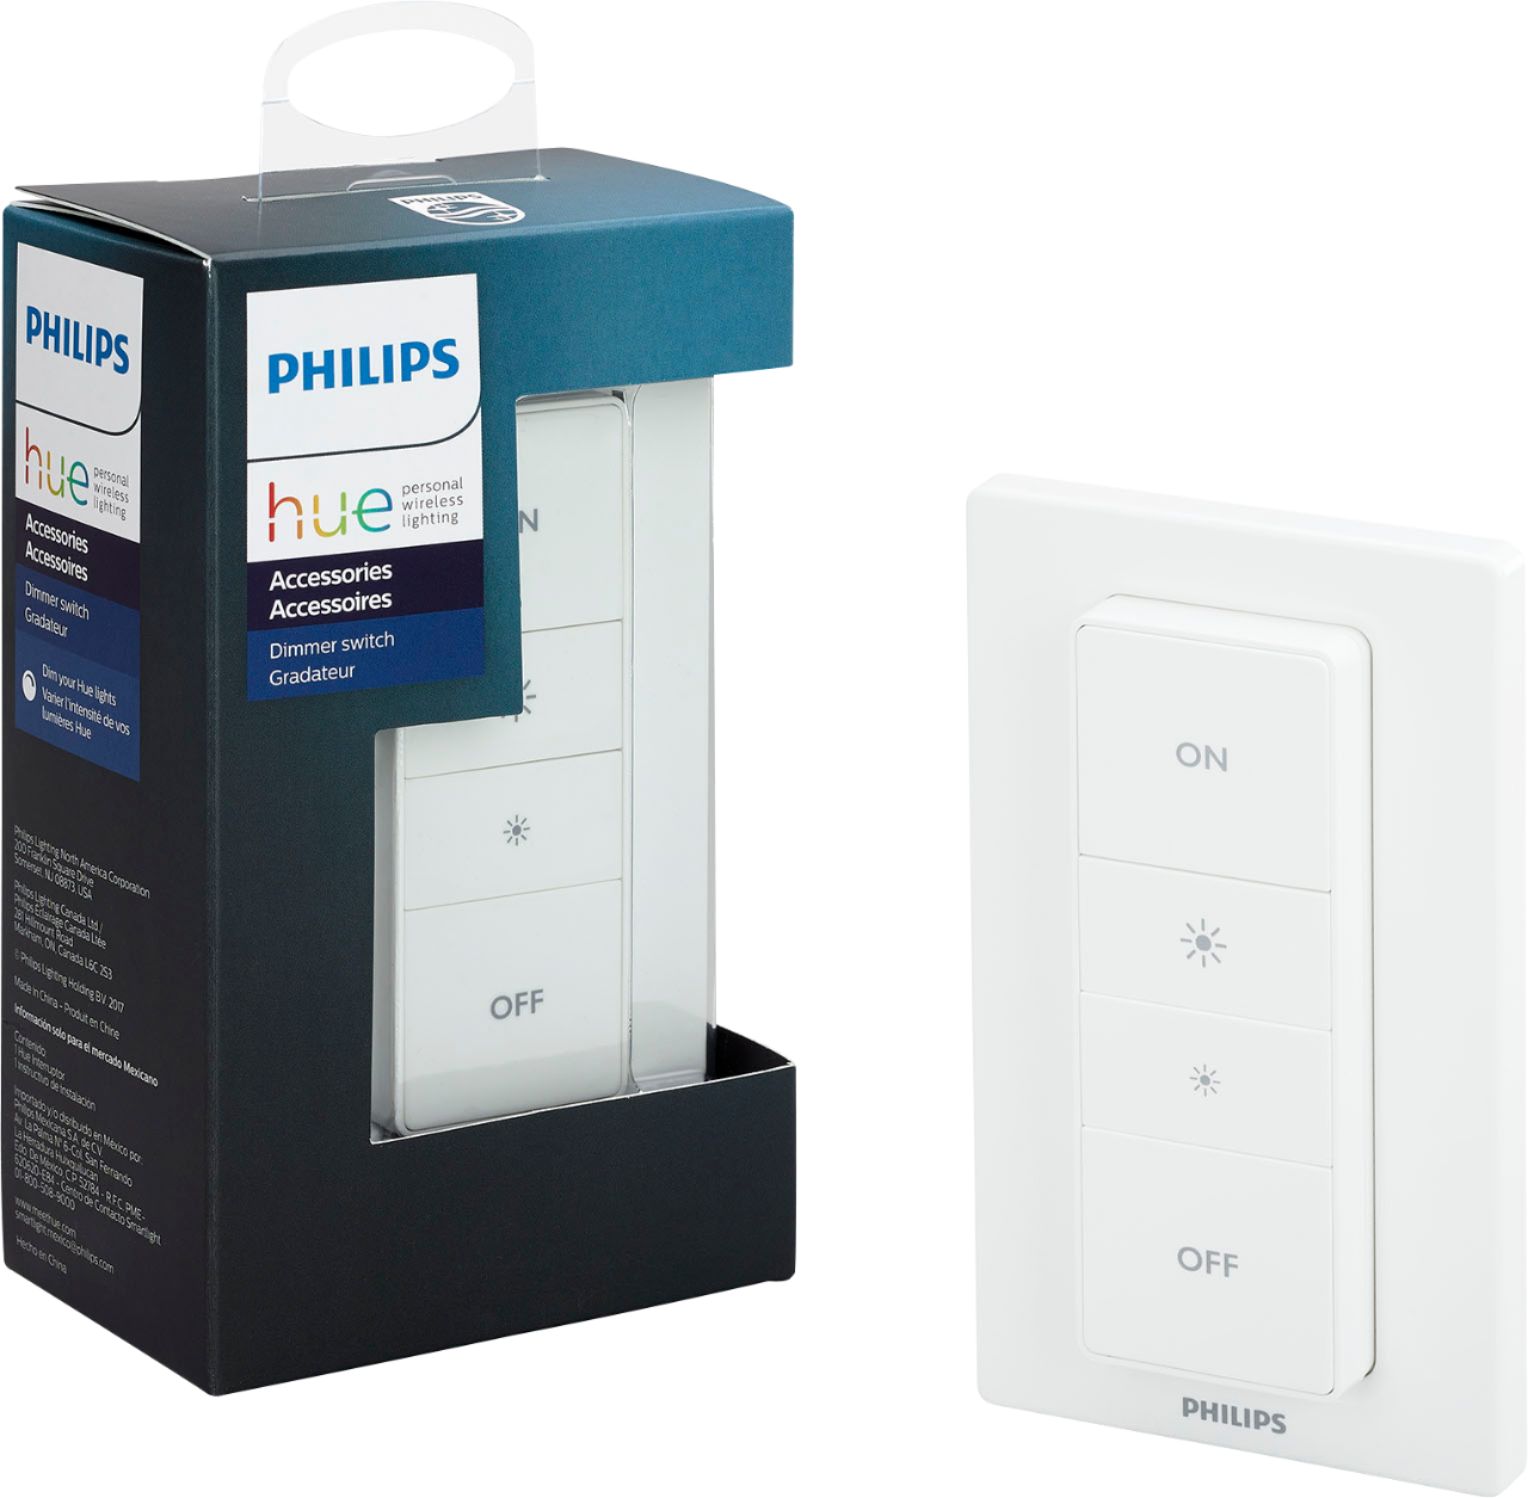 Philips Wireless on & Off Switch with Remote - White - Each